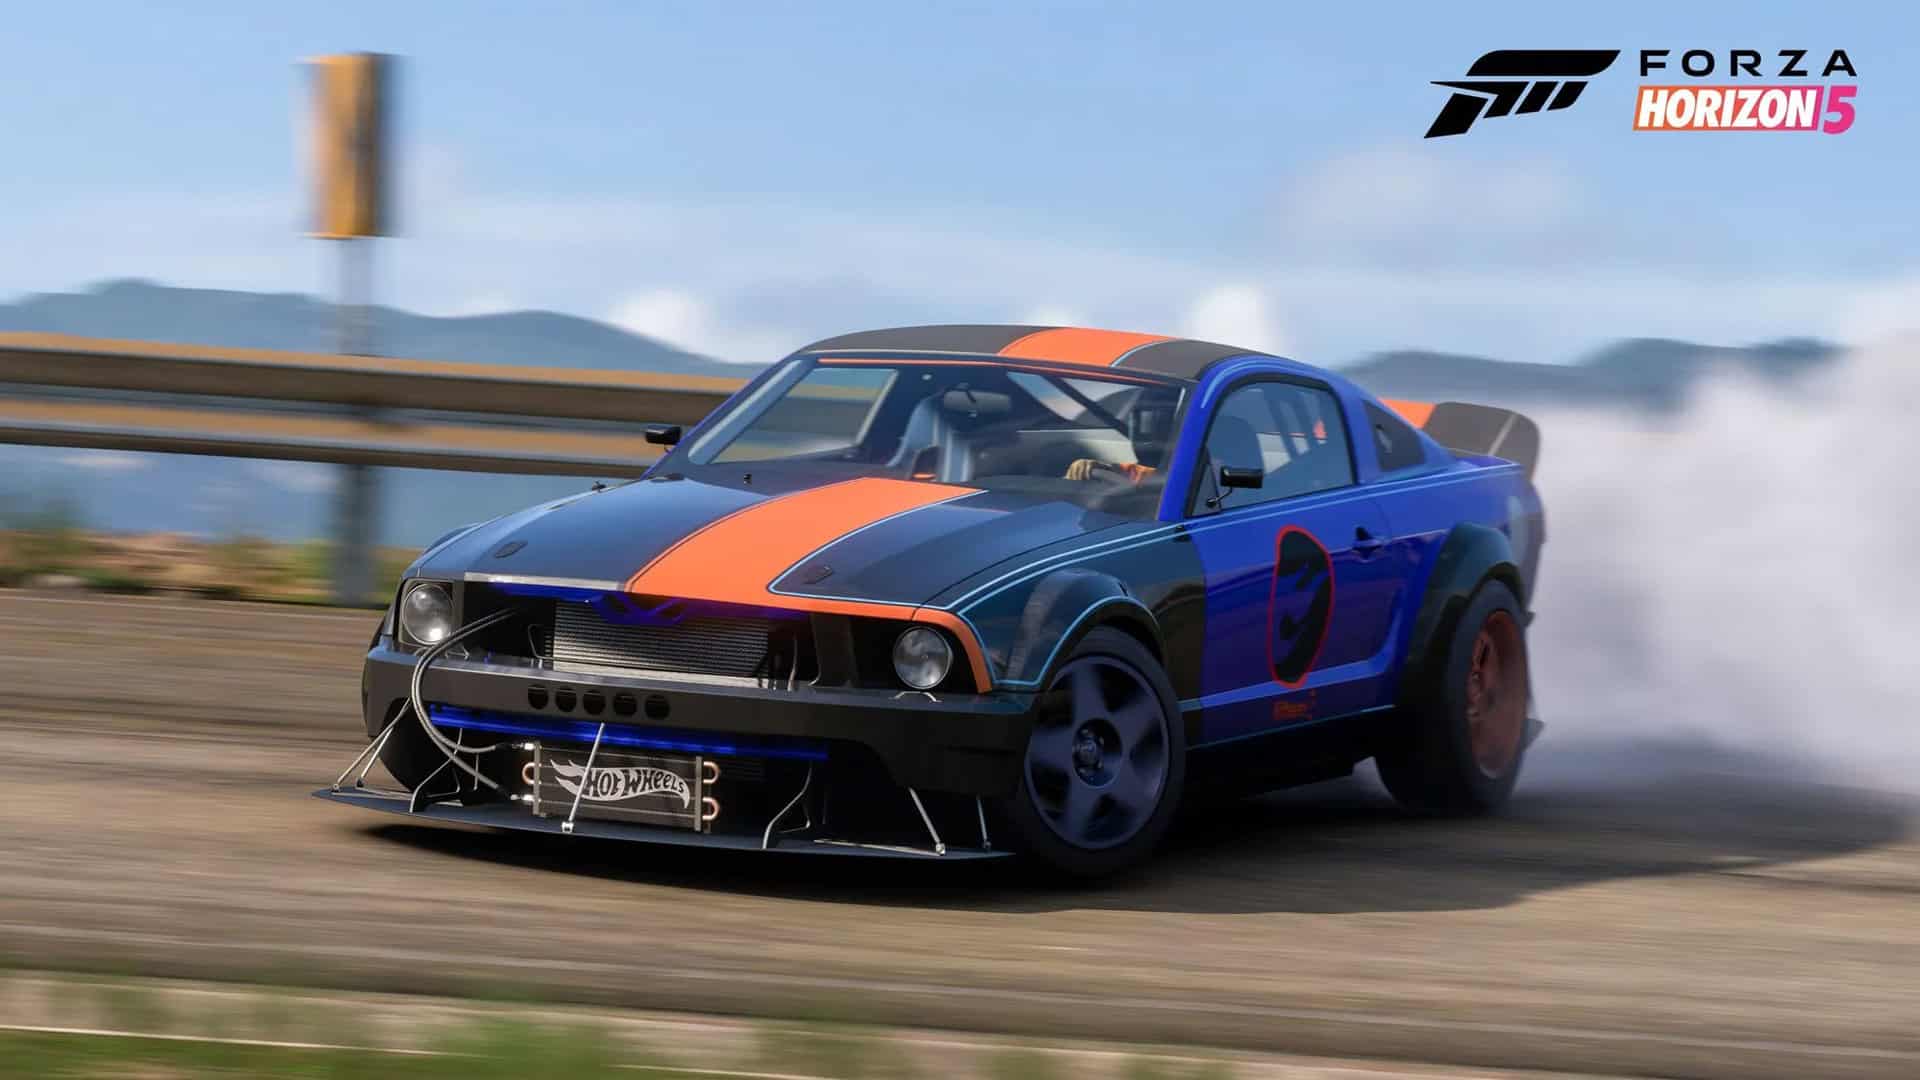 Forza Horizon 5 gets Horizon Stories co-op and some Hot Wheels cars in latest update